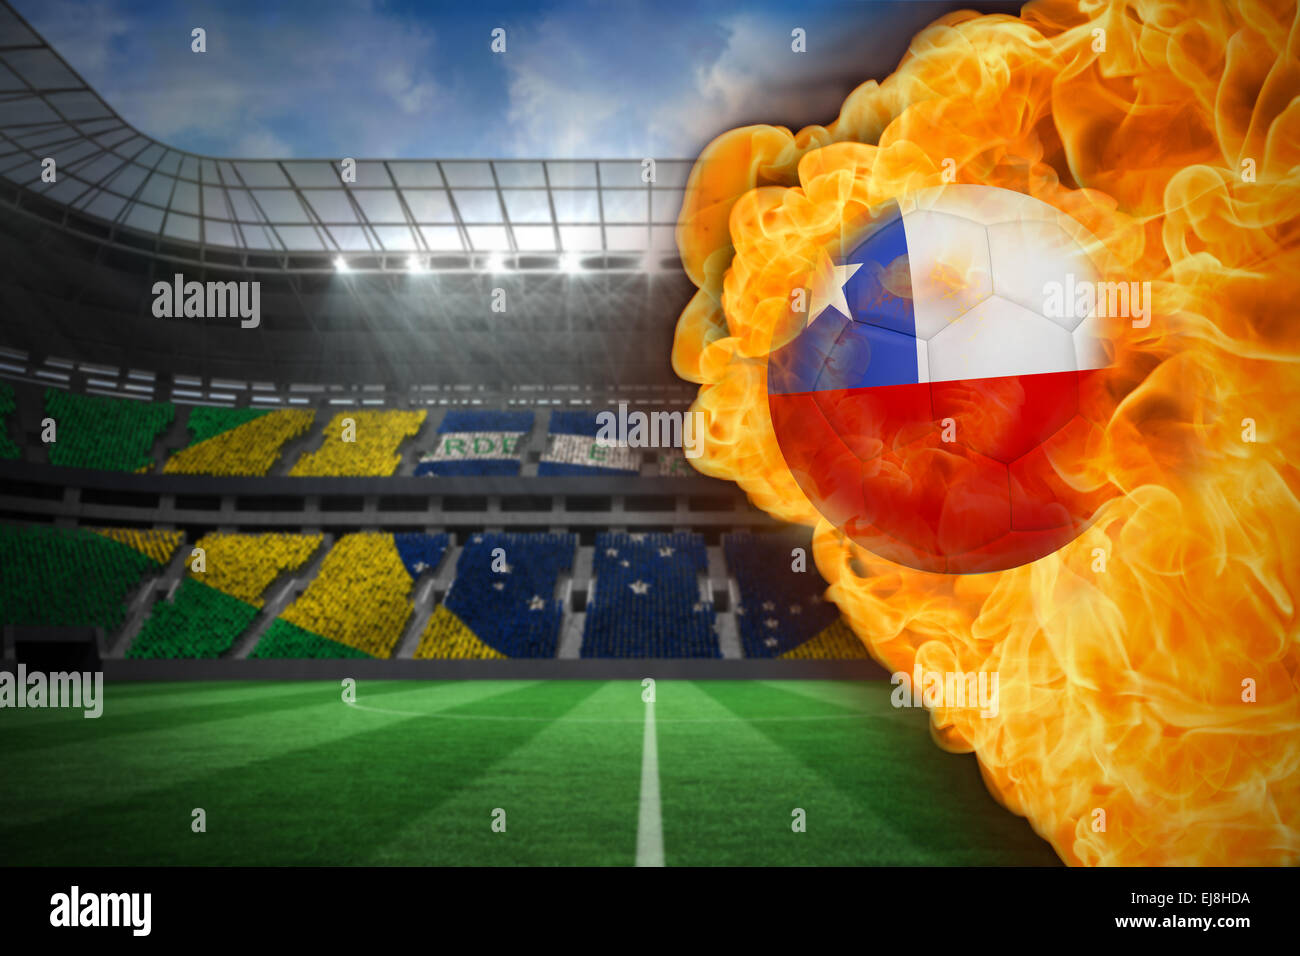 Fire surrounding chile flag football Stock Photo